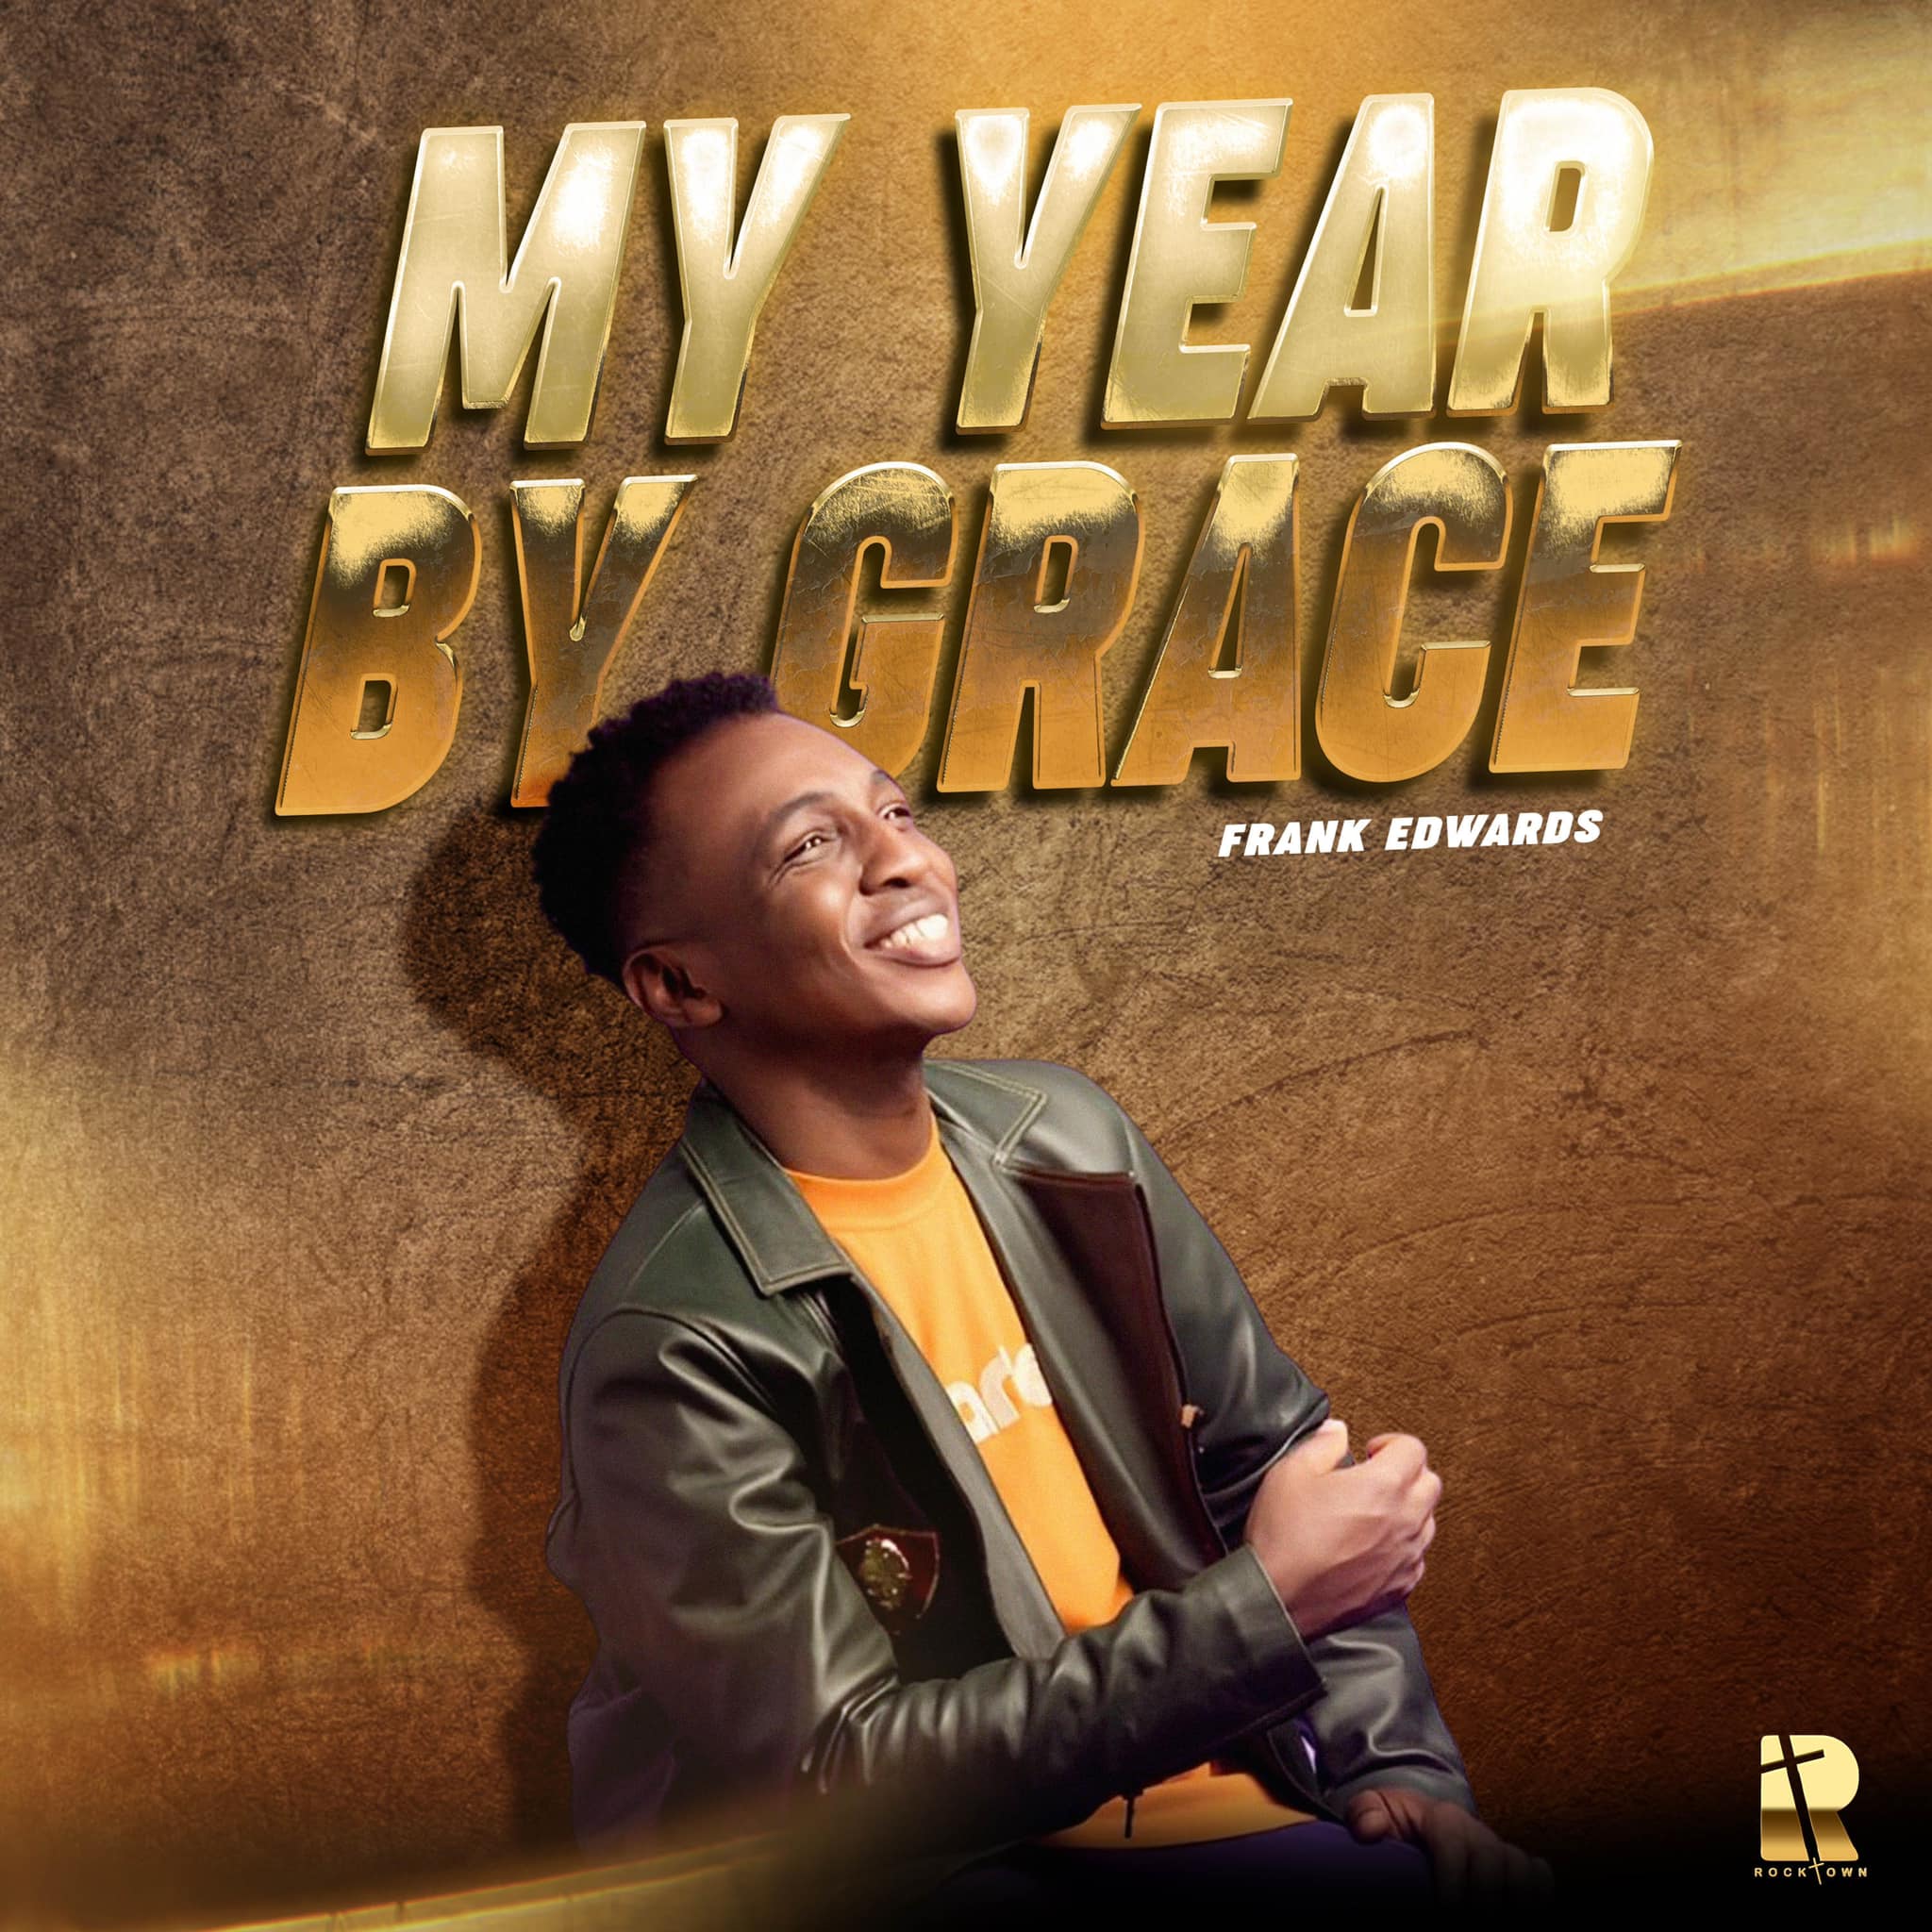 Frank Edwards - 'My Year by Grace' Mp3 Download